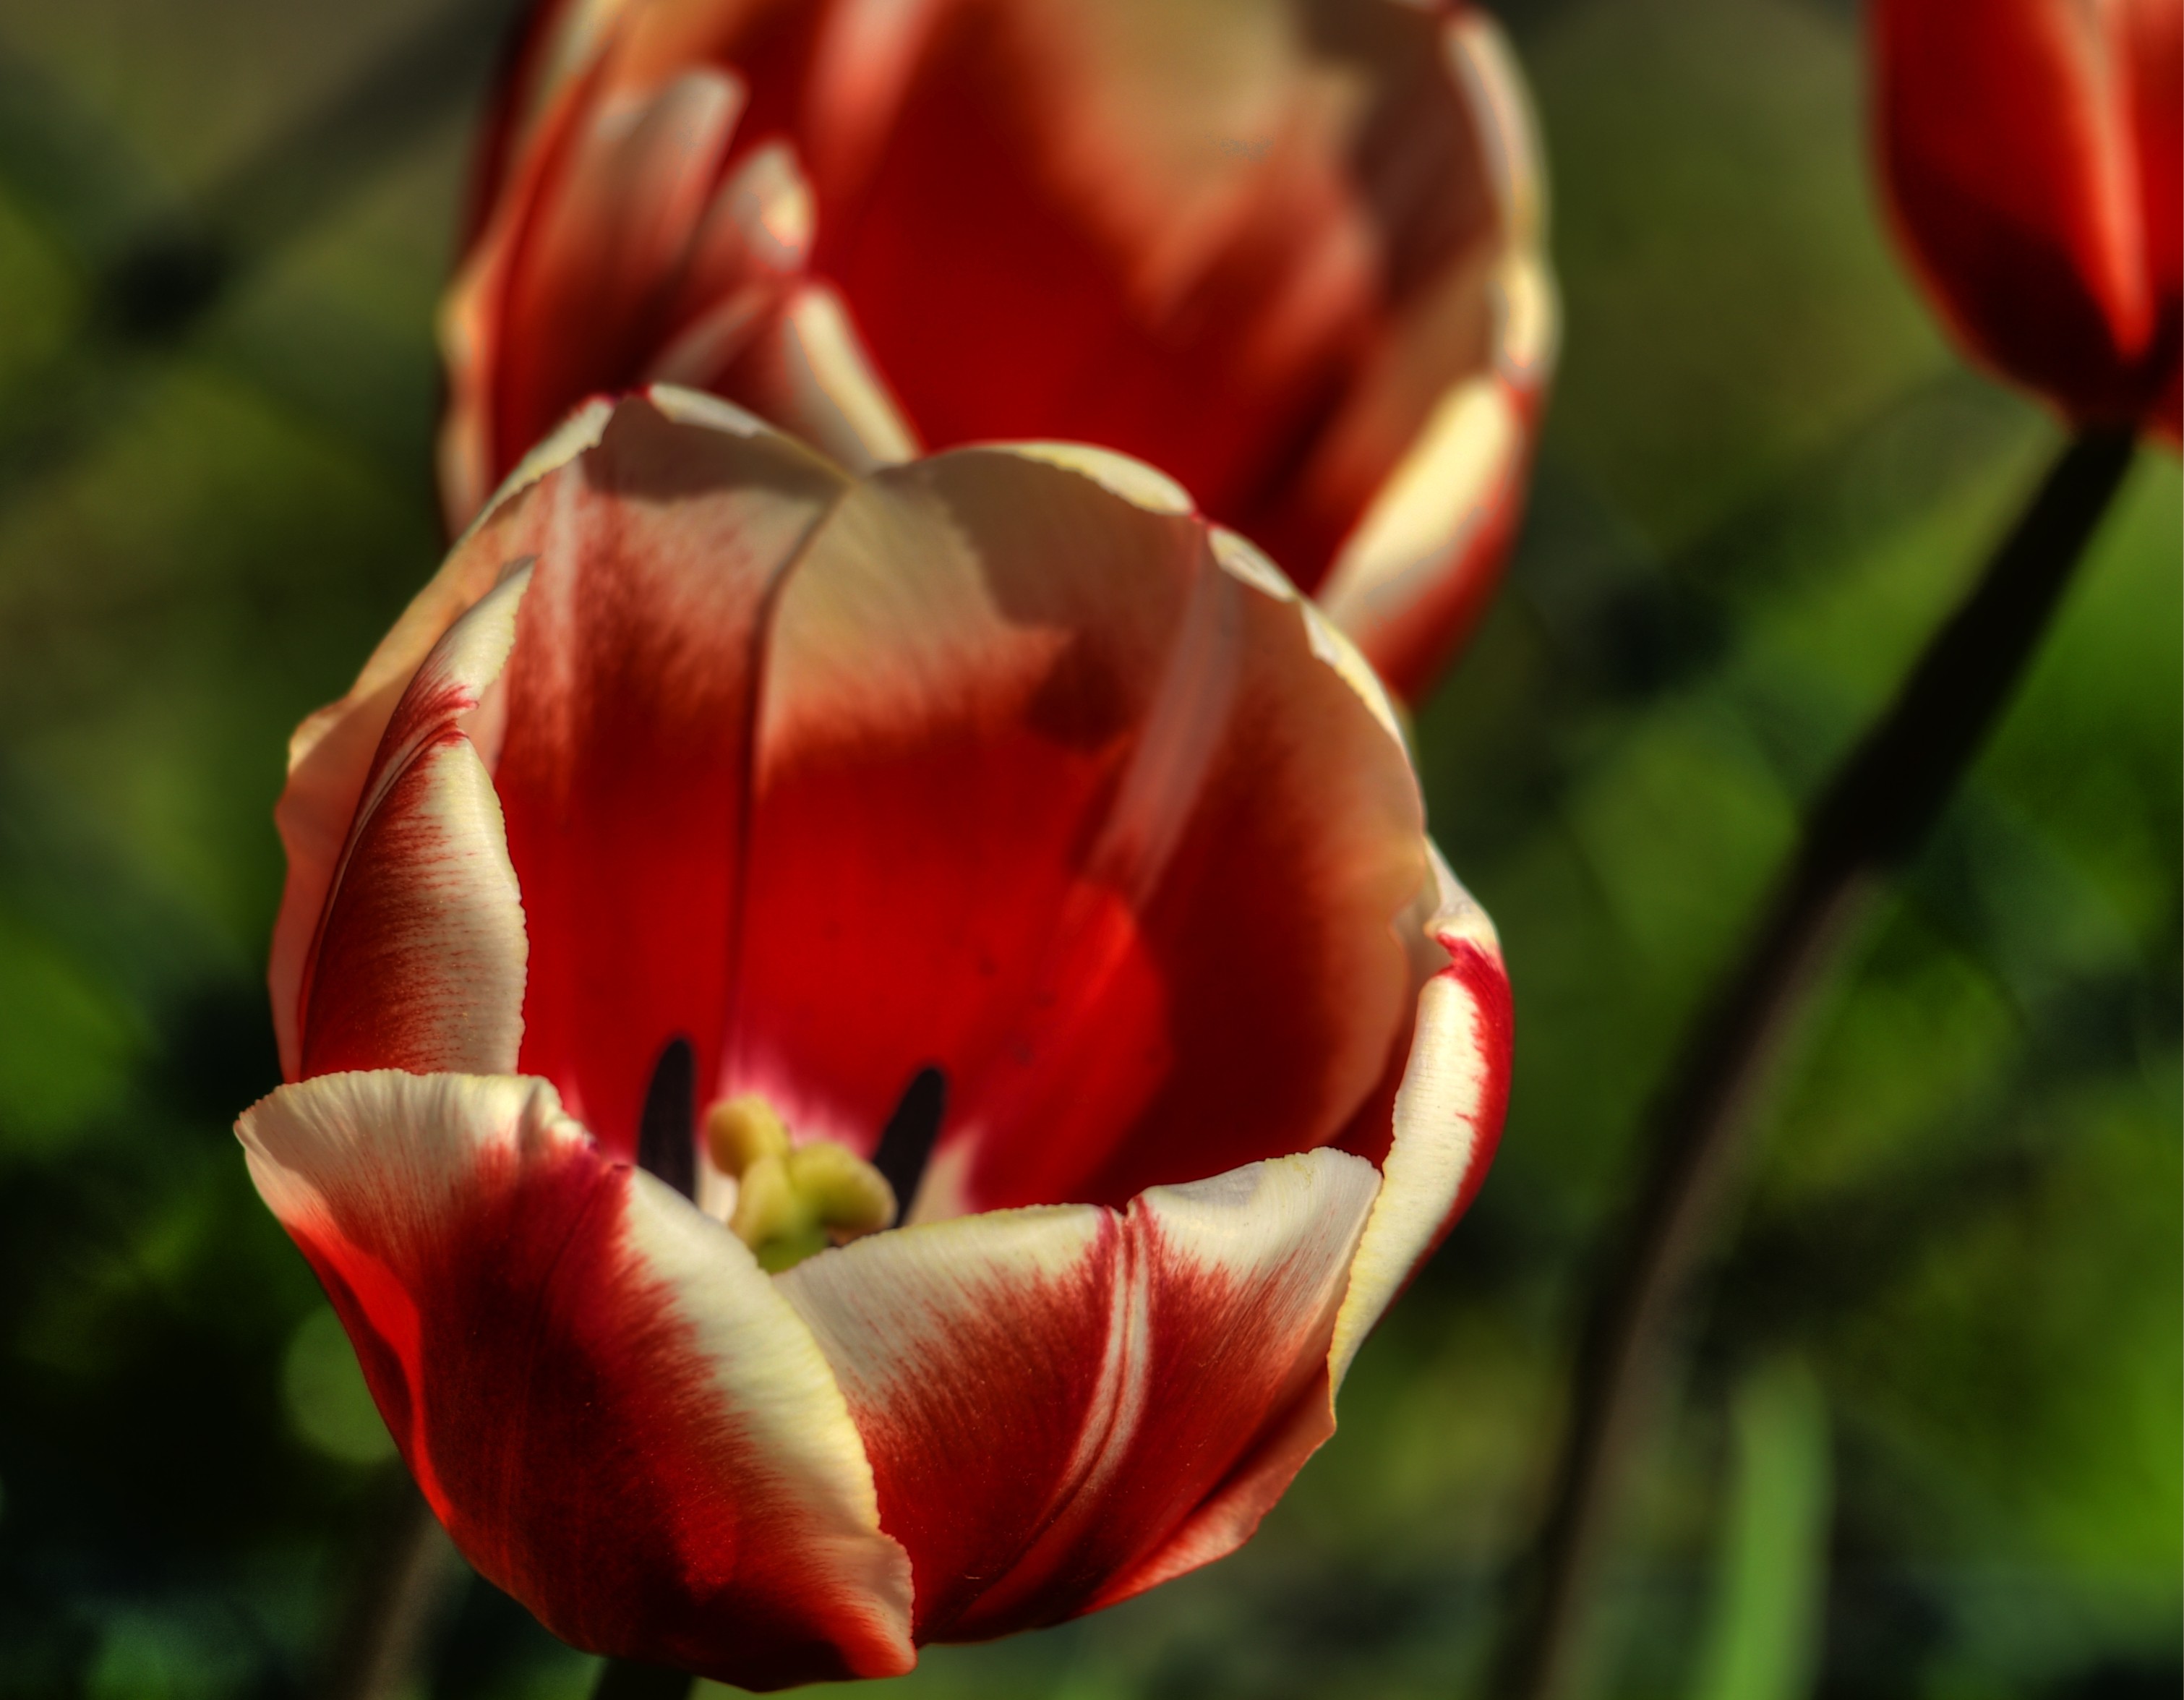 General 3021x2351 HDR flowers tulips plants red flowers